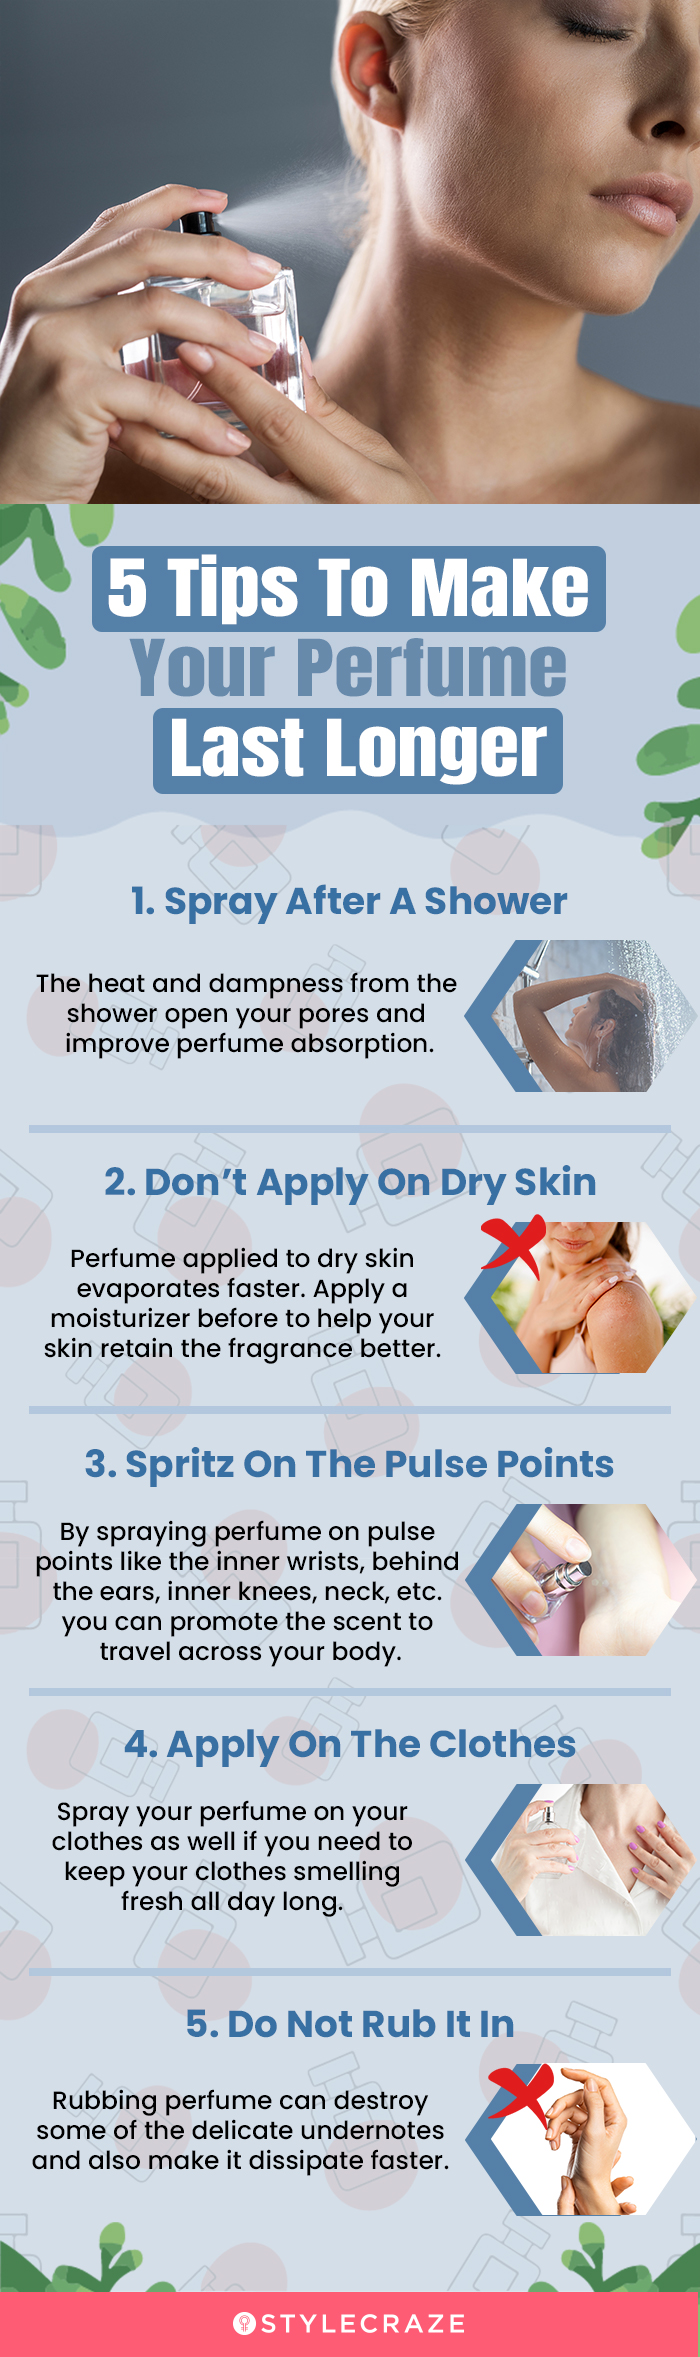 5 Tips To Make Your Perfume Last Longer(infographic)